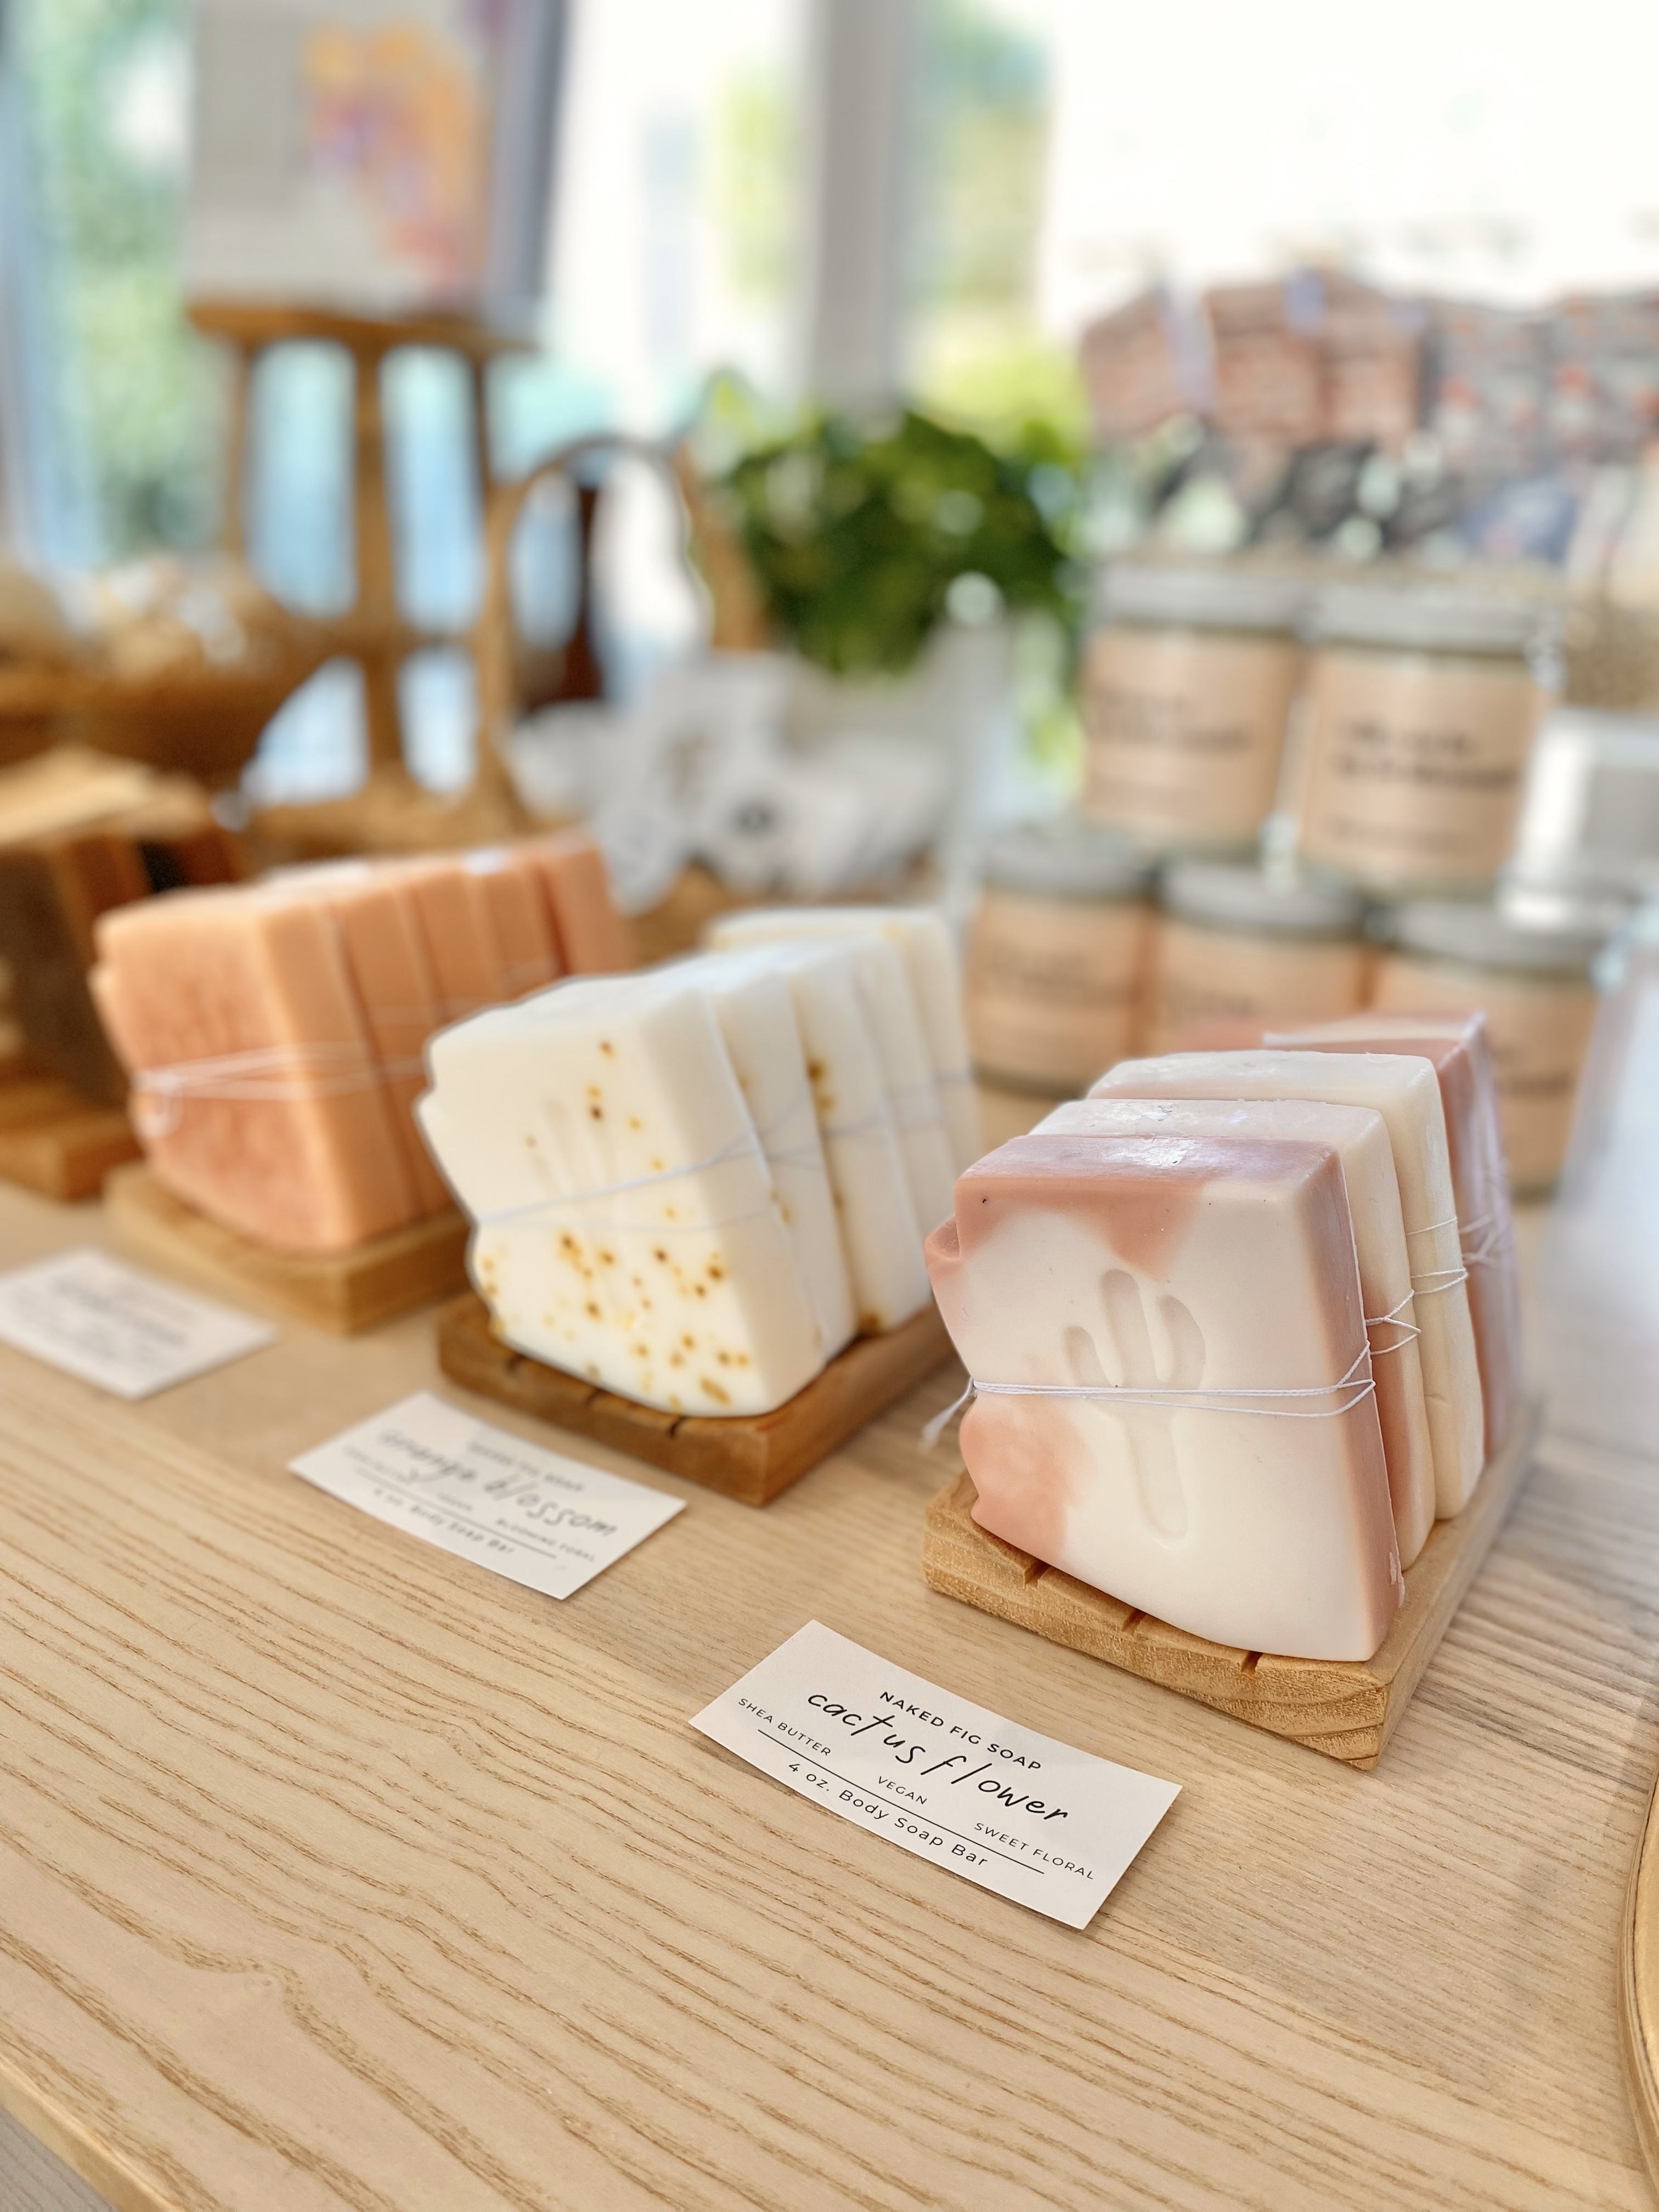 Trio of soaps sitting on a shop counter